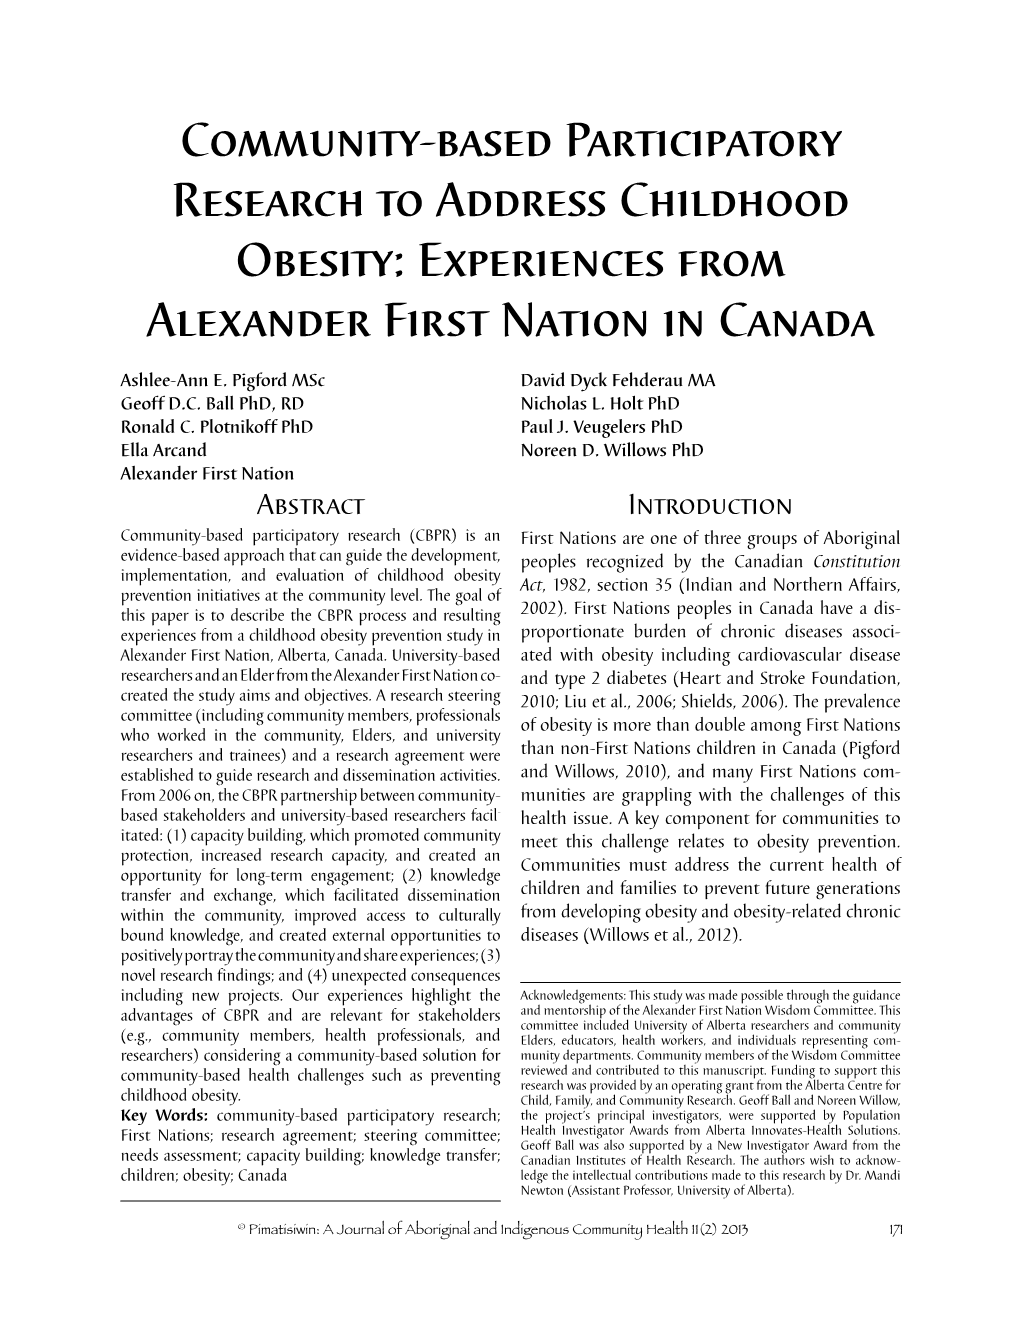 Community-Based Participatory Research to Address Childhood Obesity: Experiences from Alexander First Nation in Canada